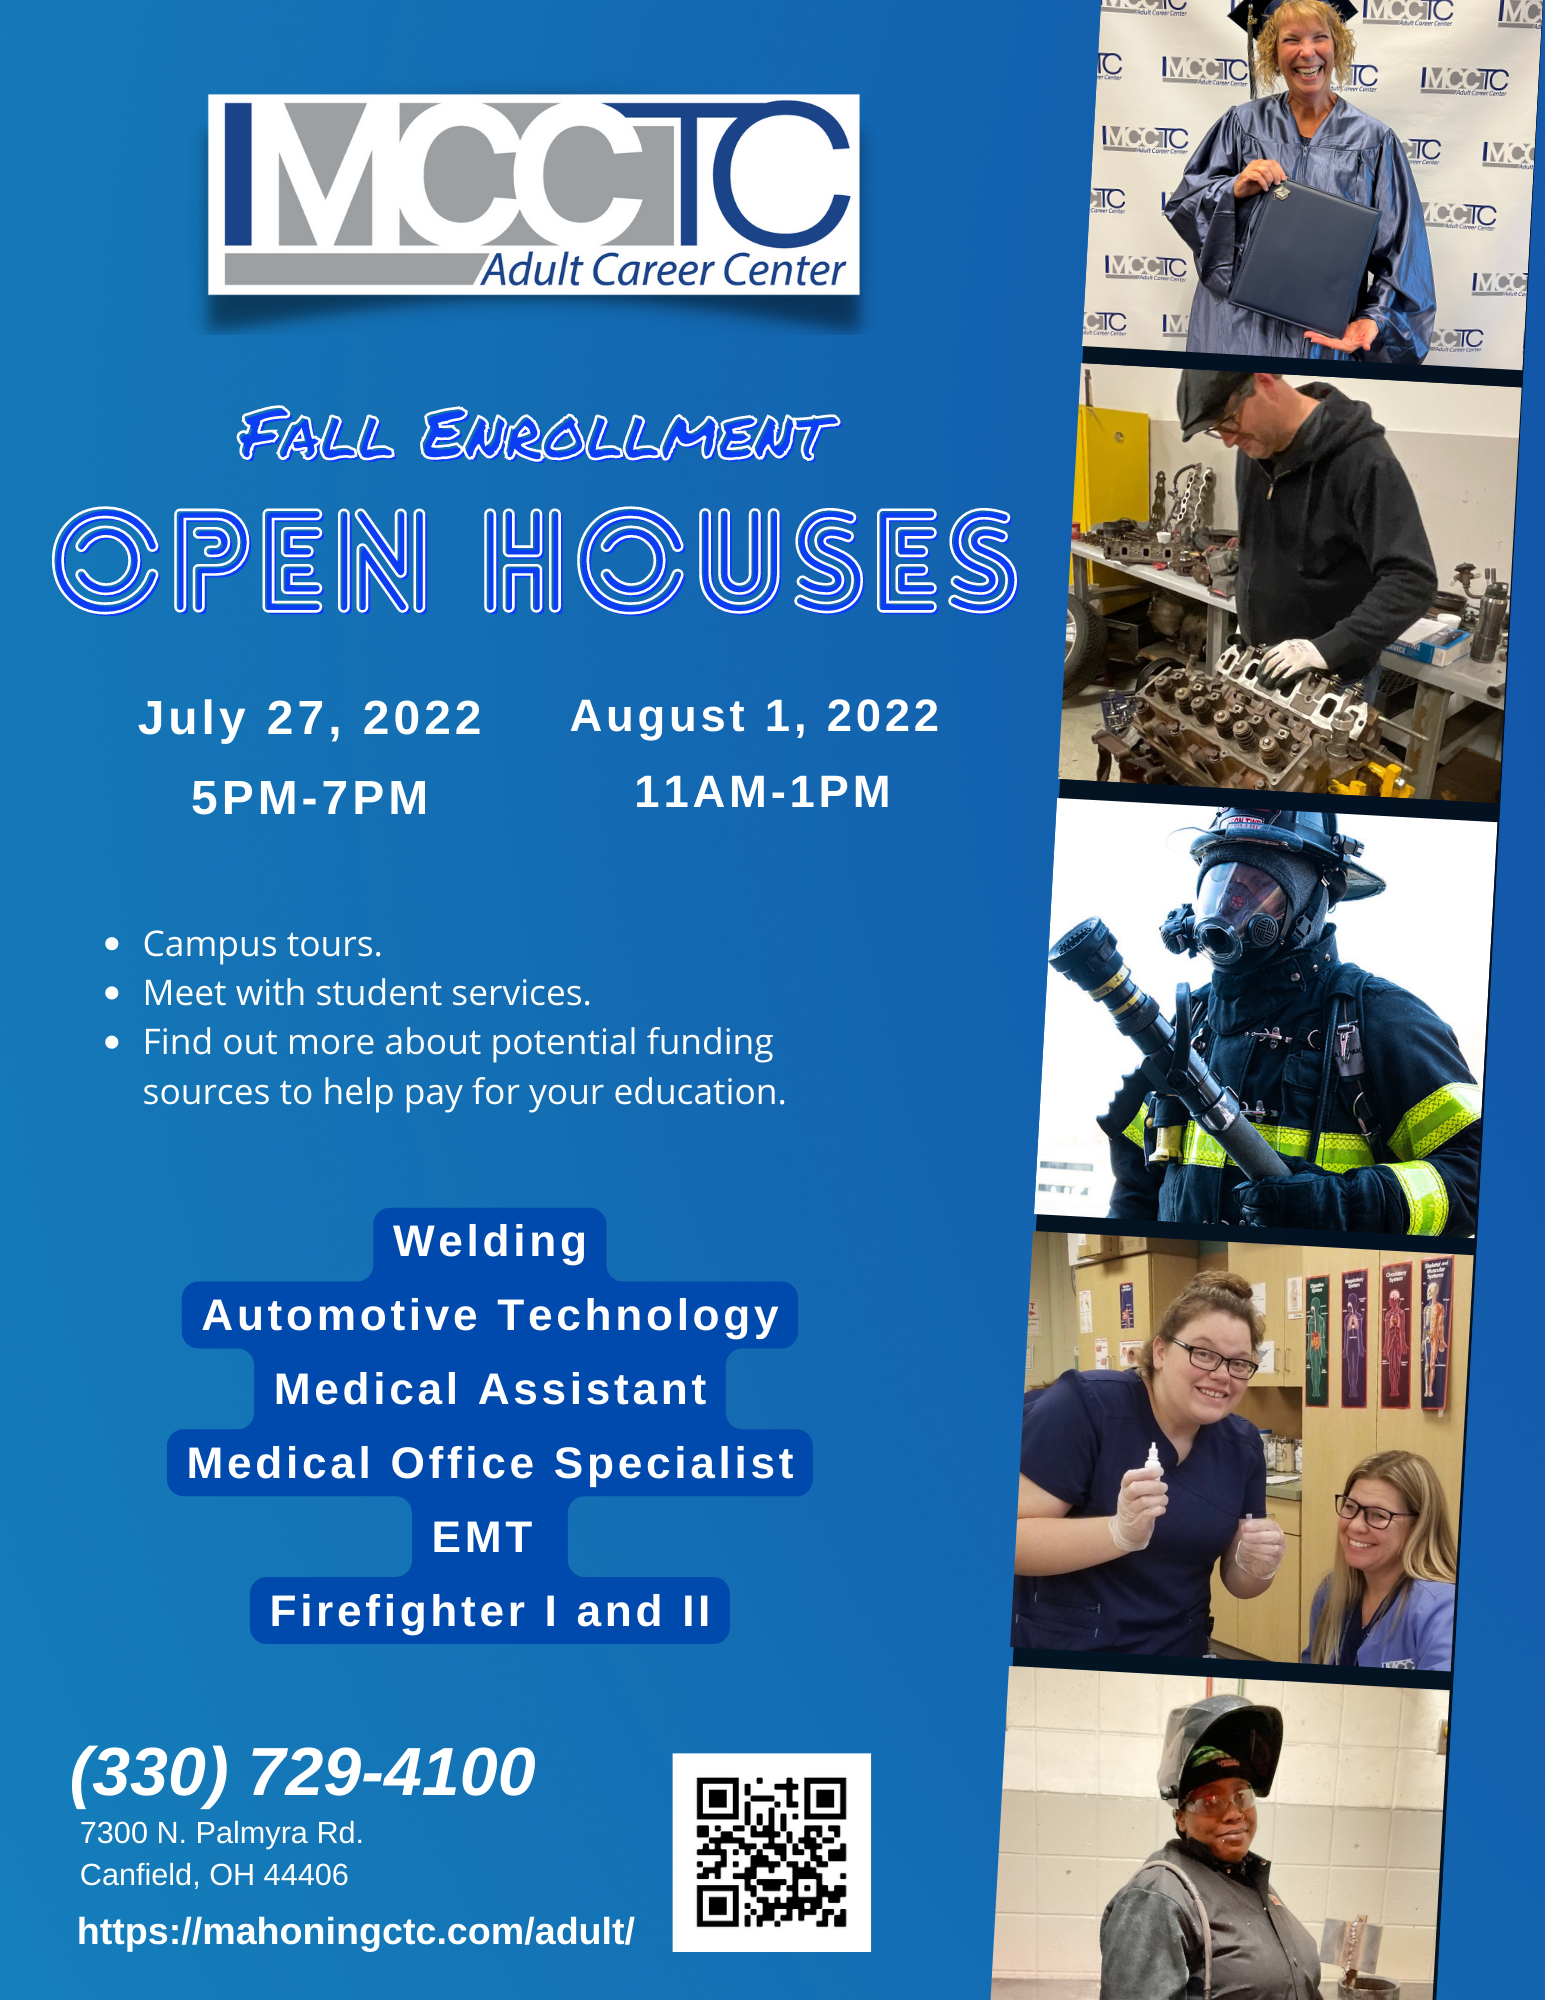 Evening and Daytime Fall Enrollment Open Houses to be Held at MCCTC Adult Career Center in Canfield, OH